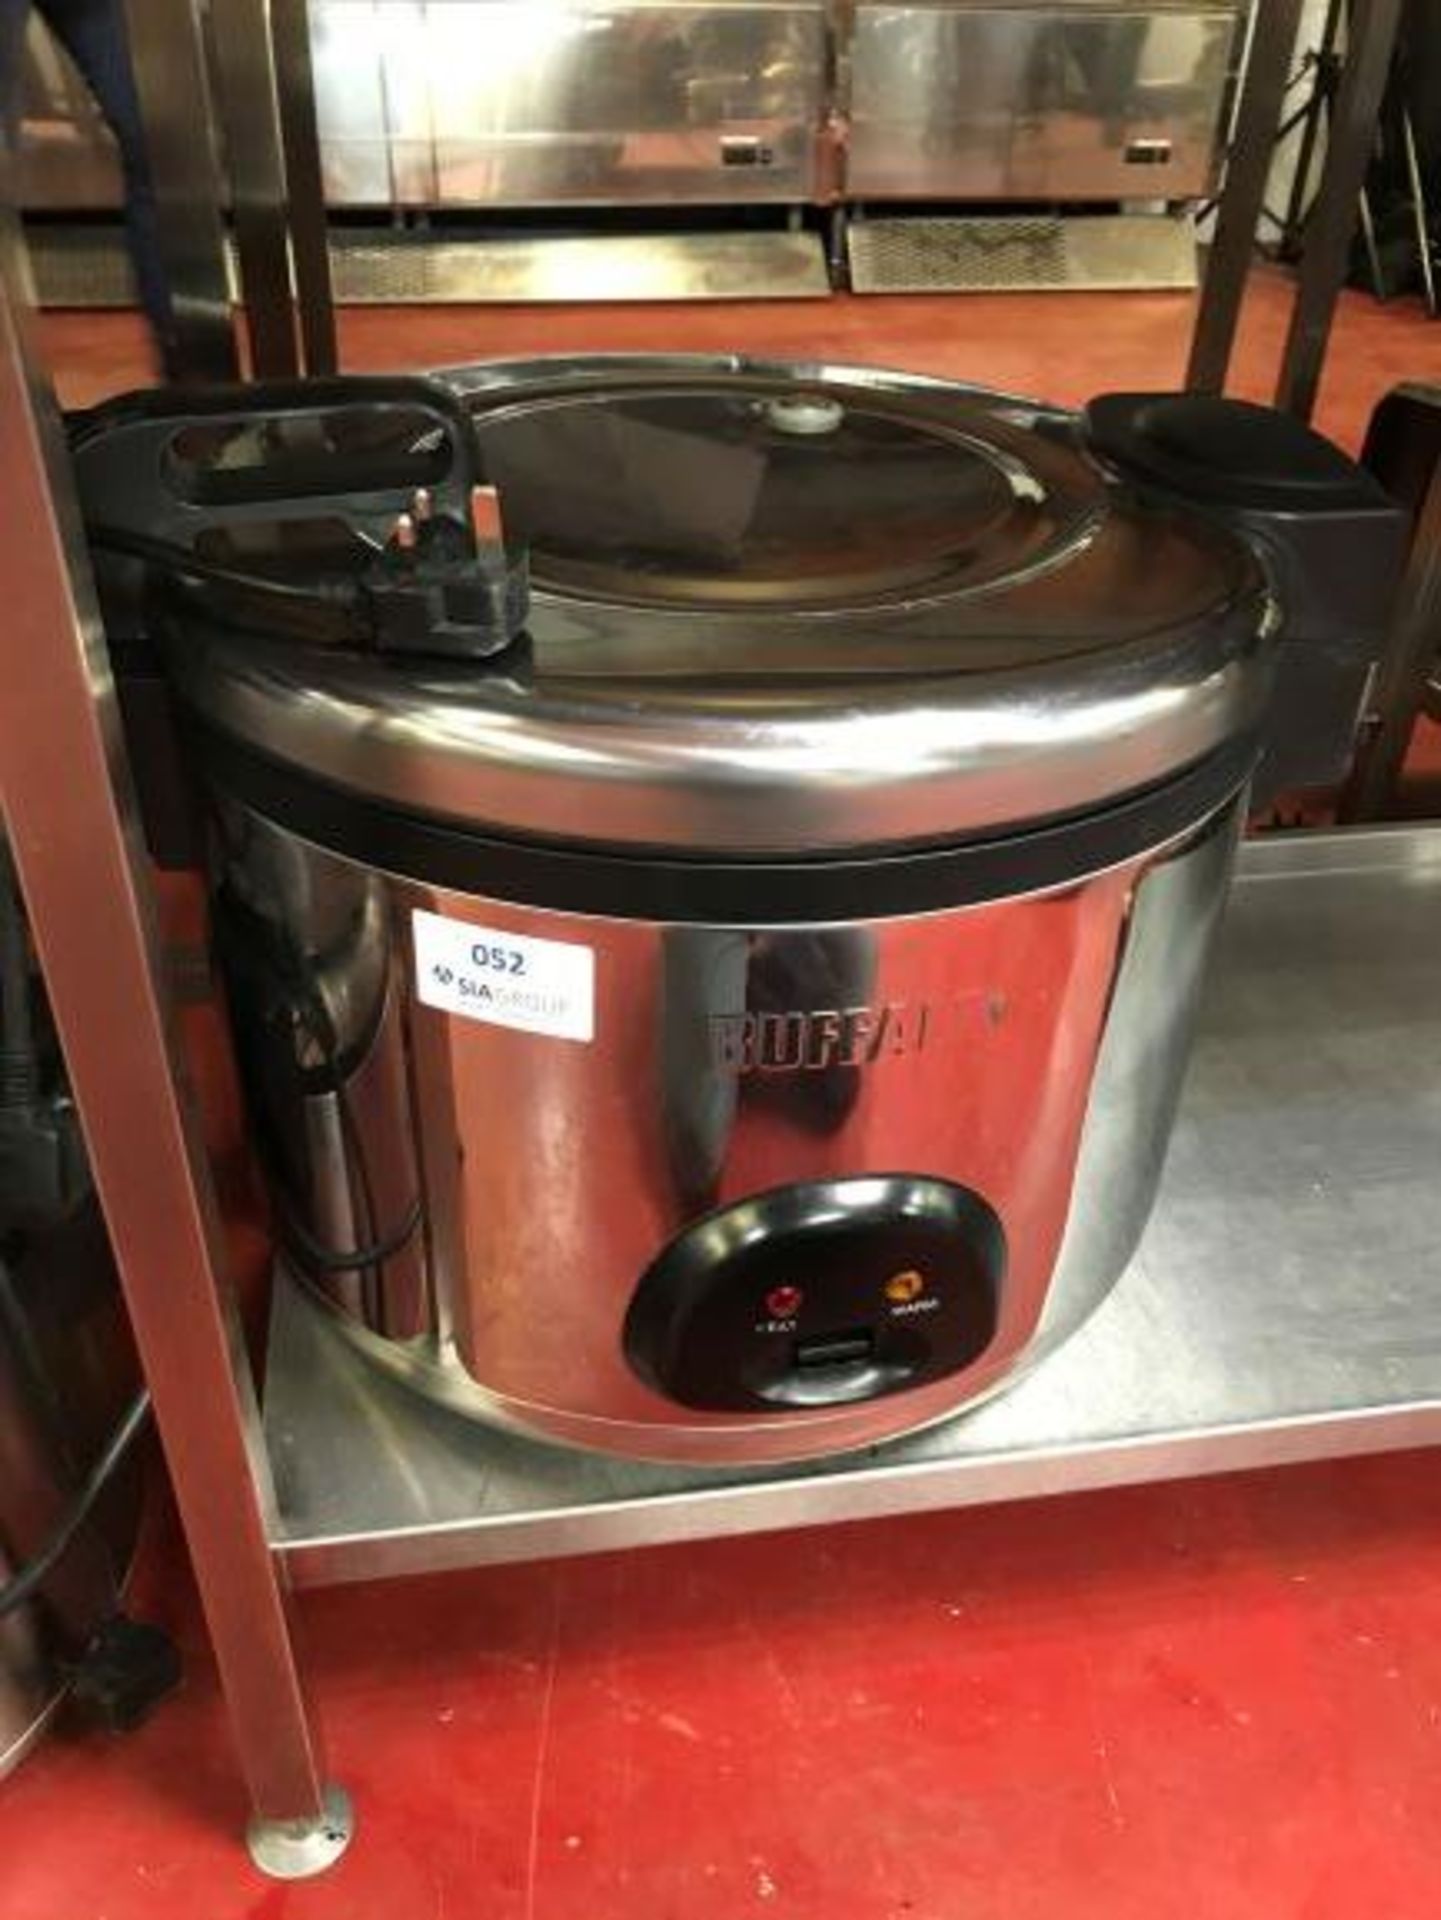 Buffalo CK698-02 stainless steel commercial large rice cooker - Image 3 of 3